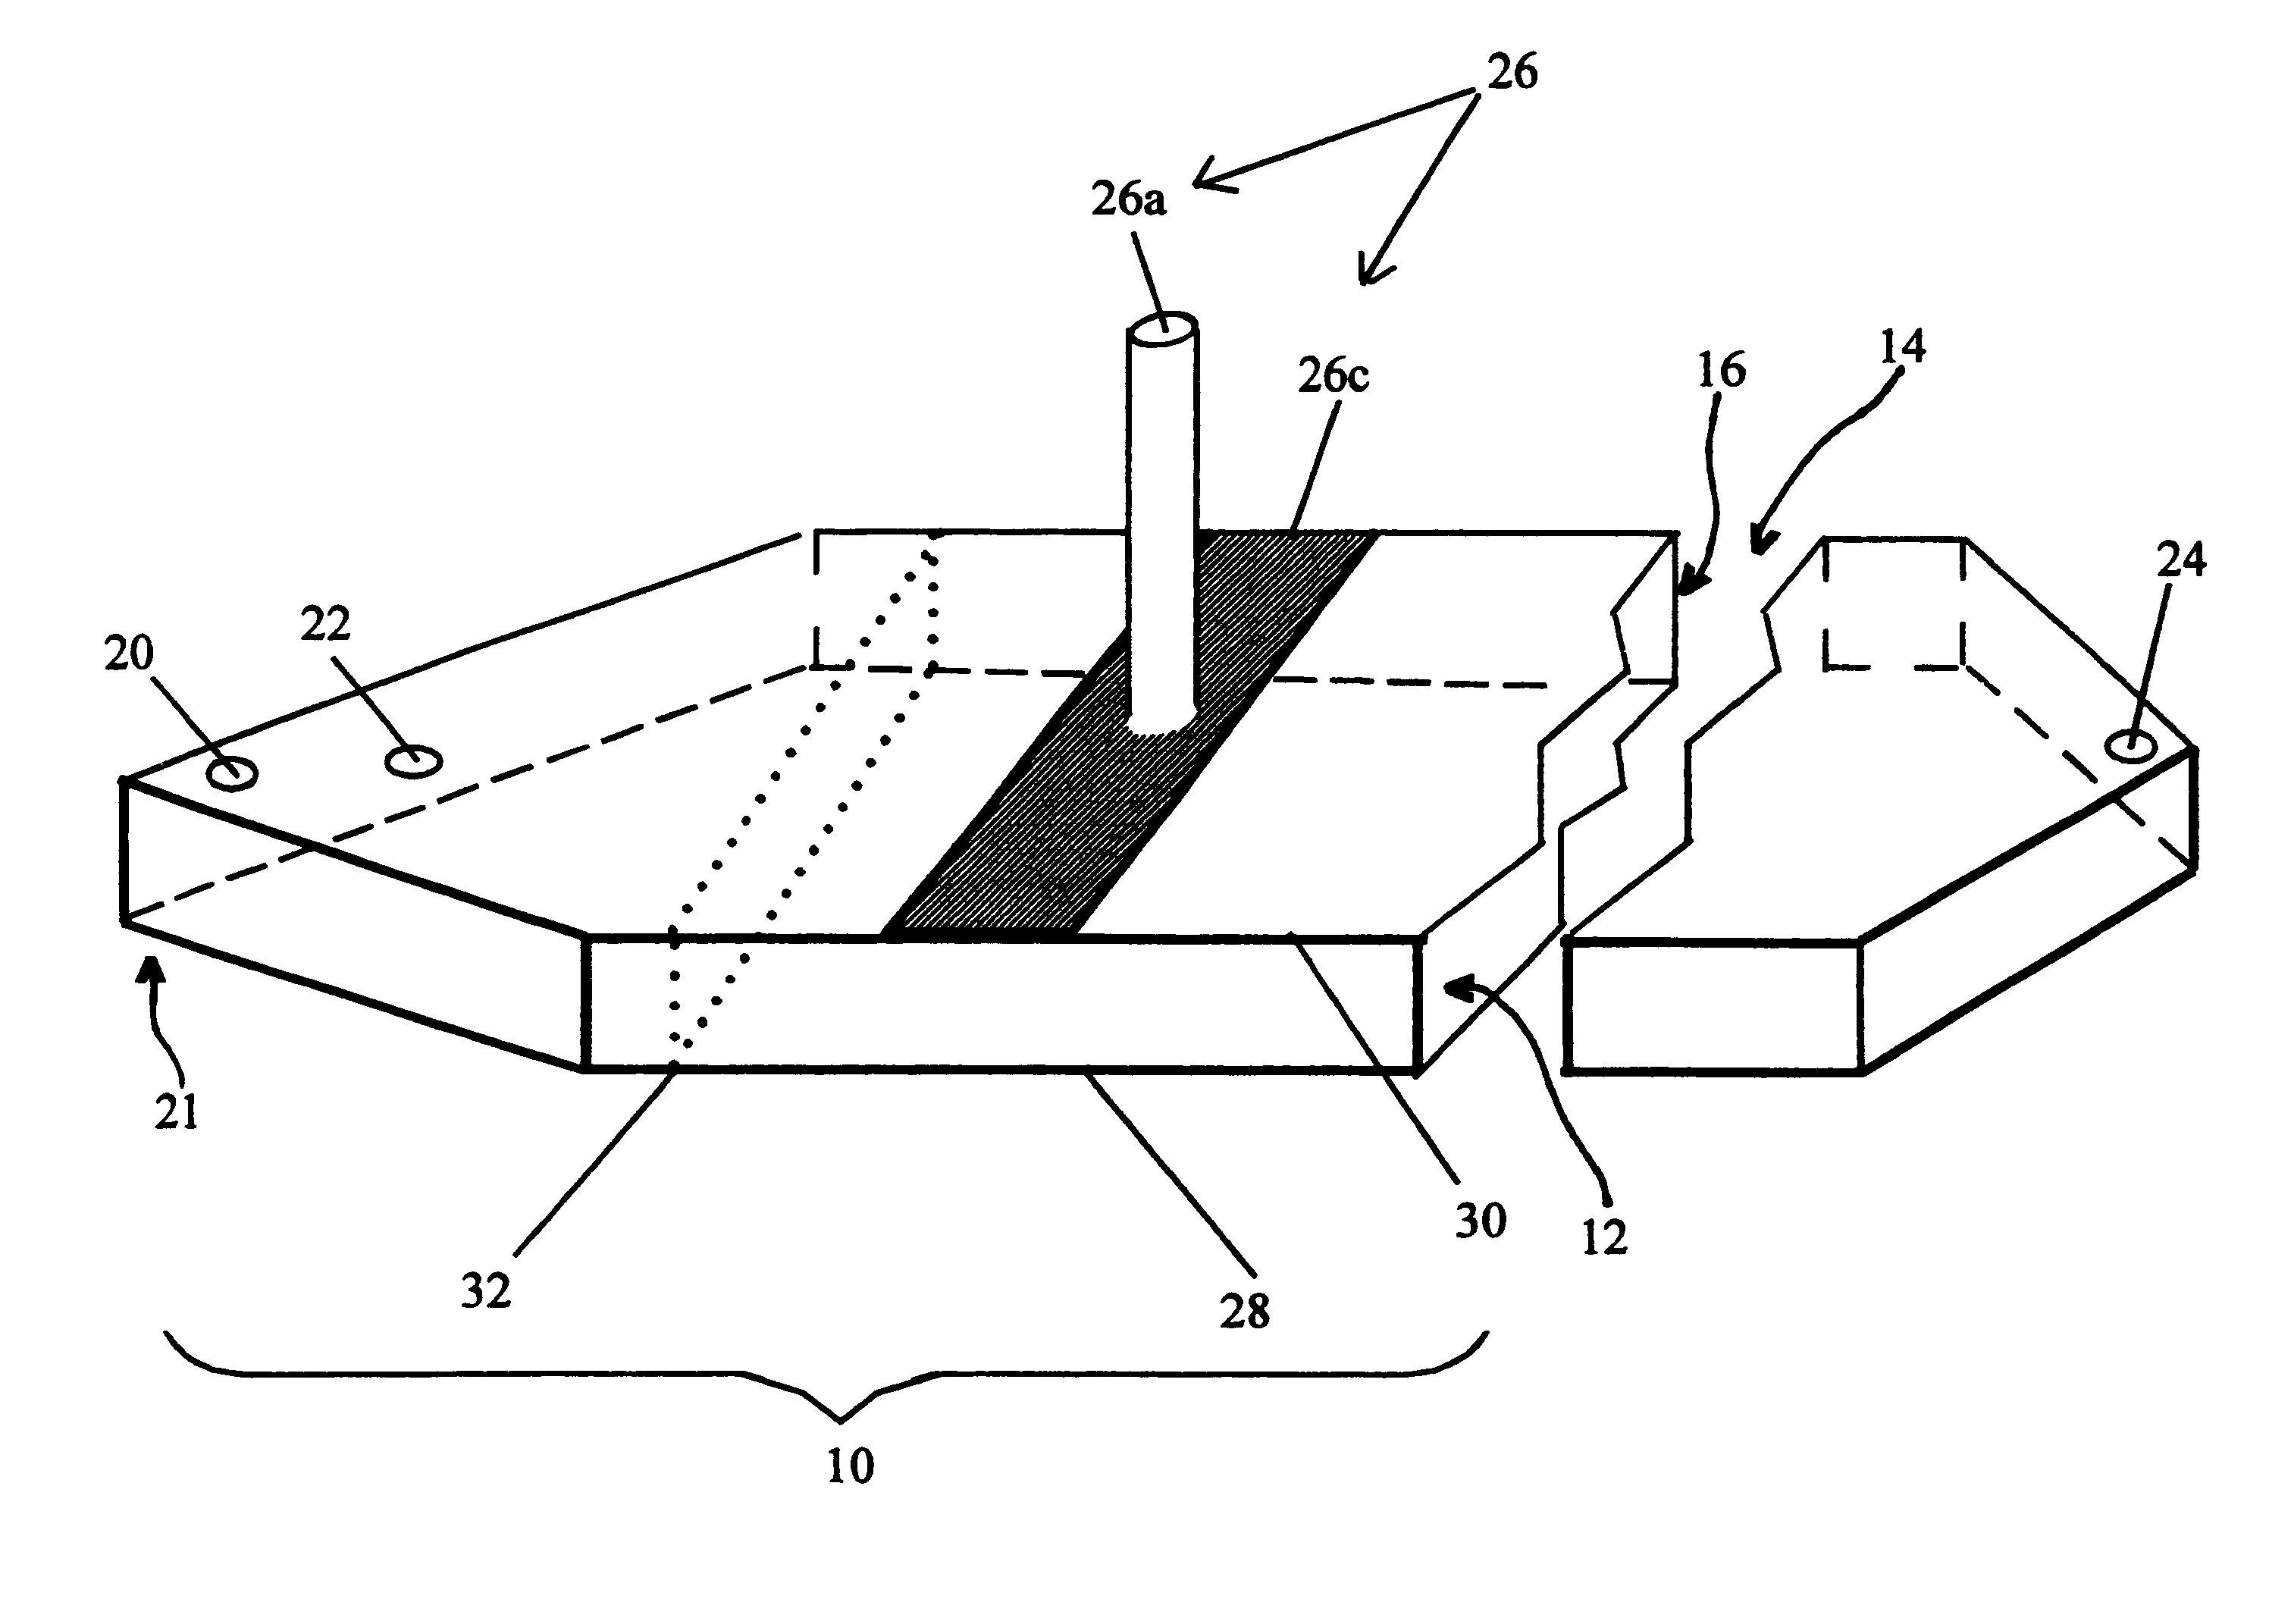 Sample focusing device and method